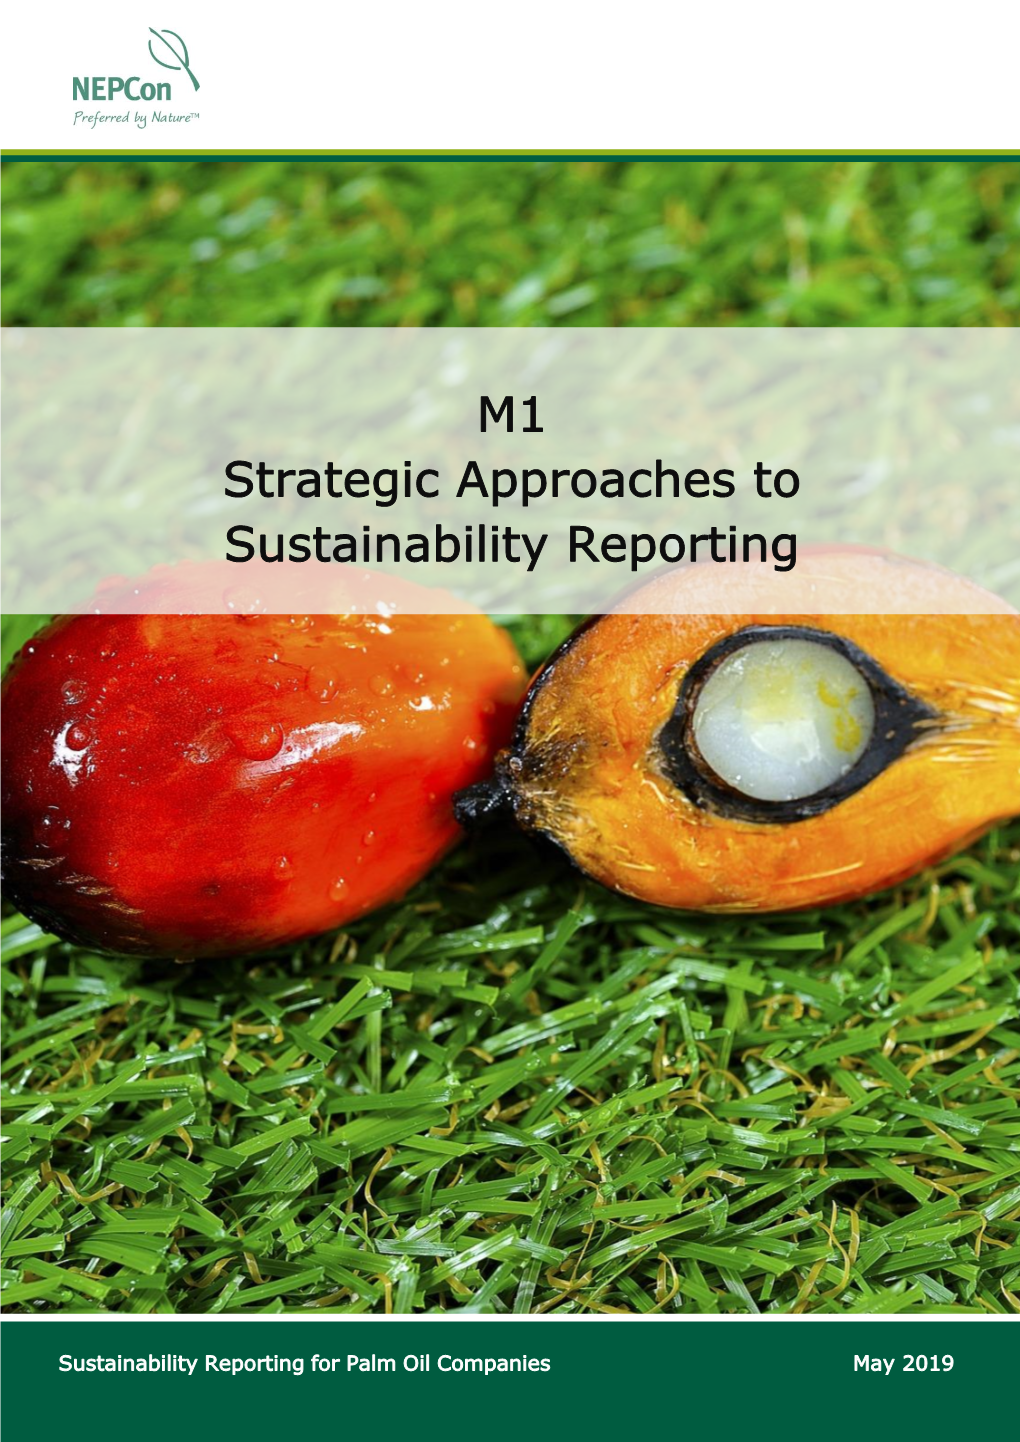 M1 Strategic Approaches to Sustainability Reporting